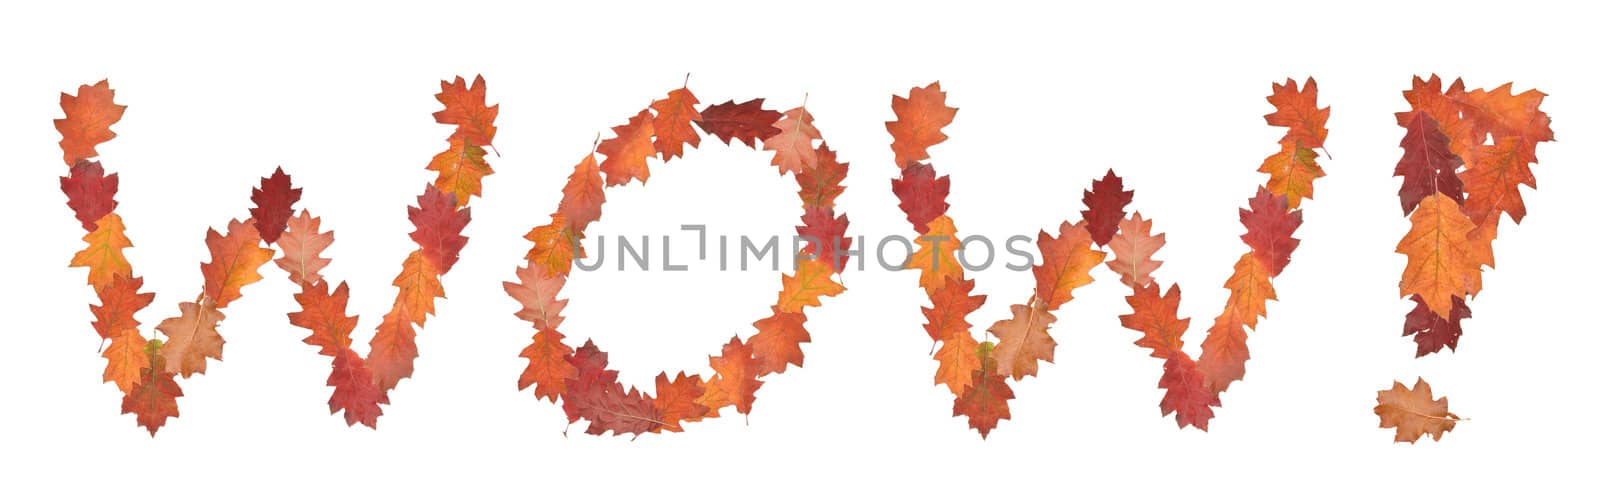 word wow made of autumn leaves as a button